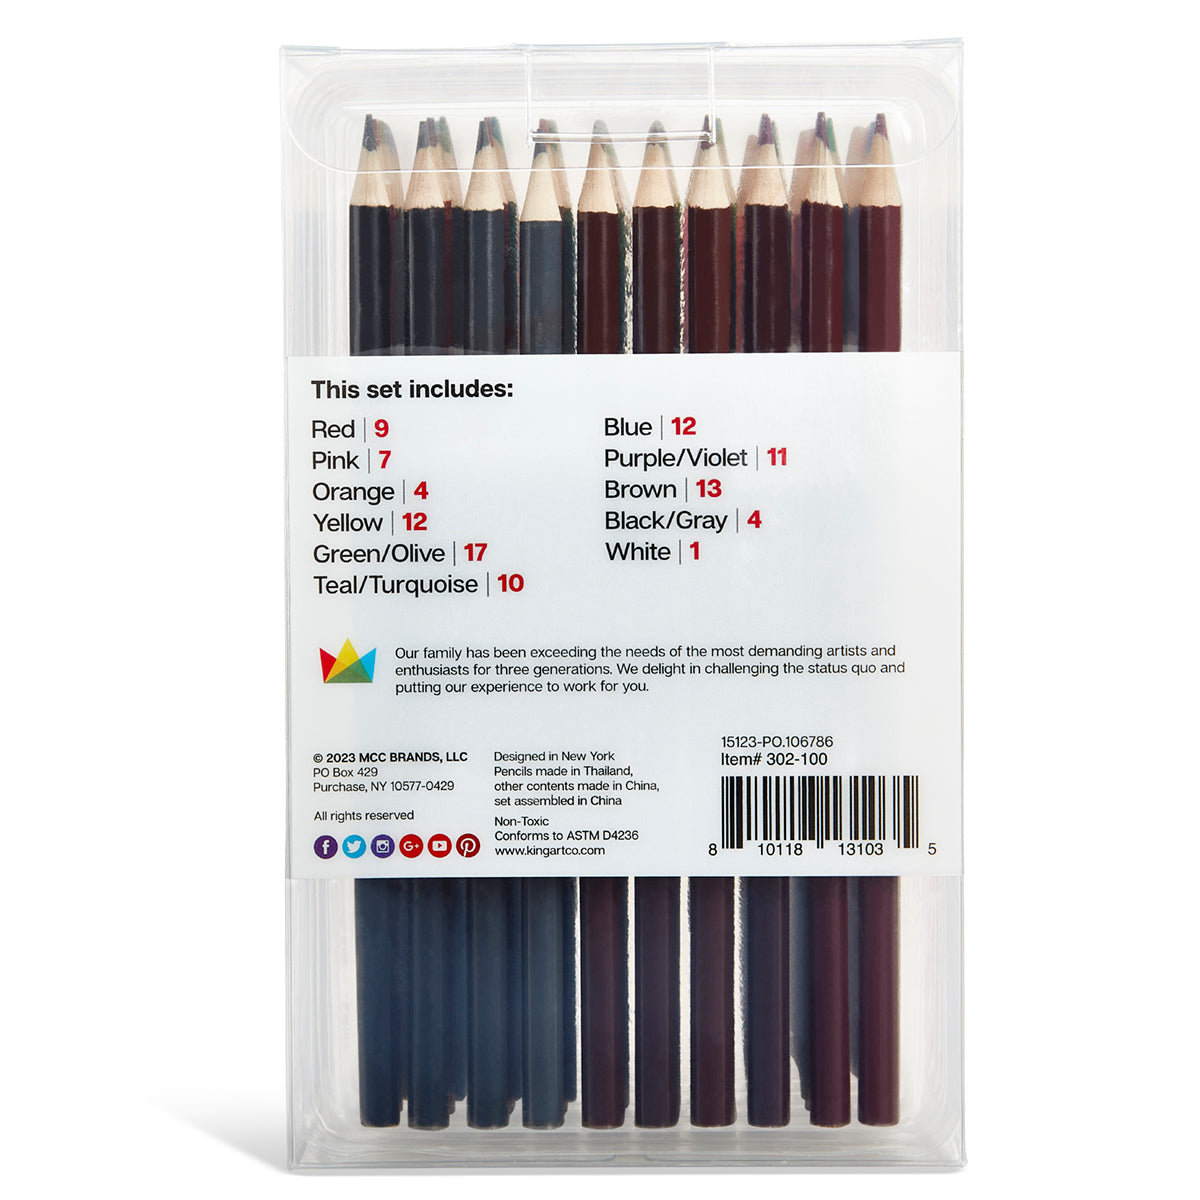 KINGART Pro Soft Core Colored Pencil Collection Set of 72